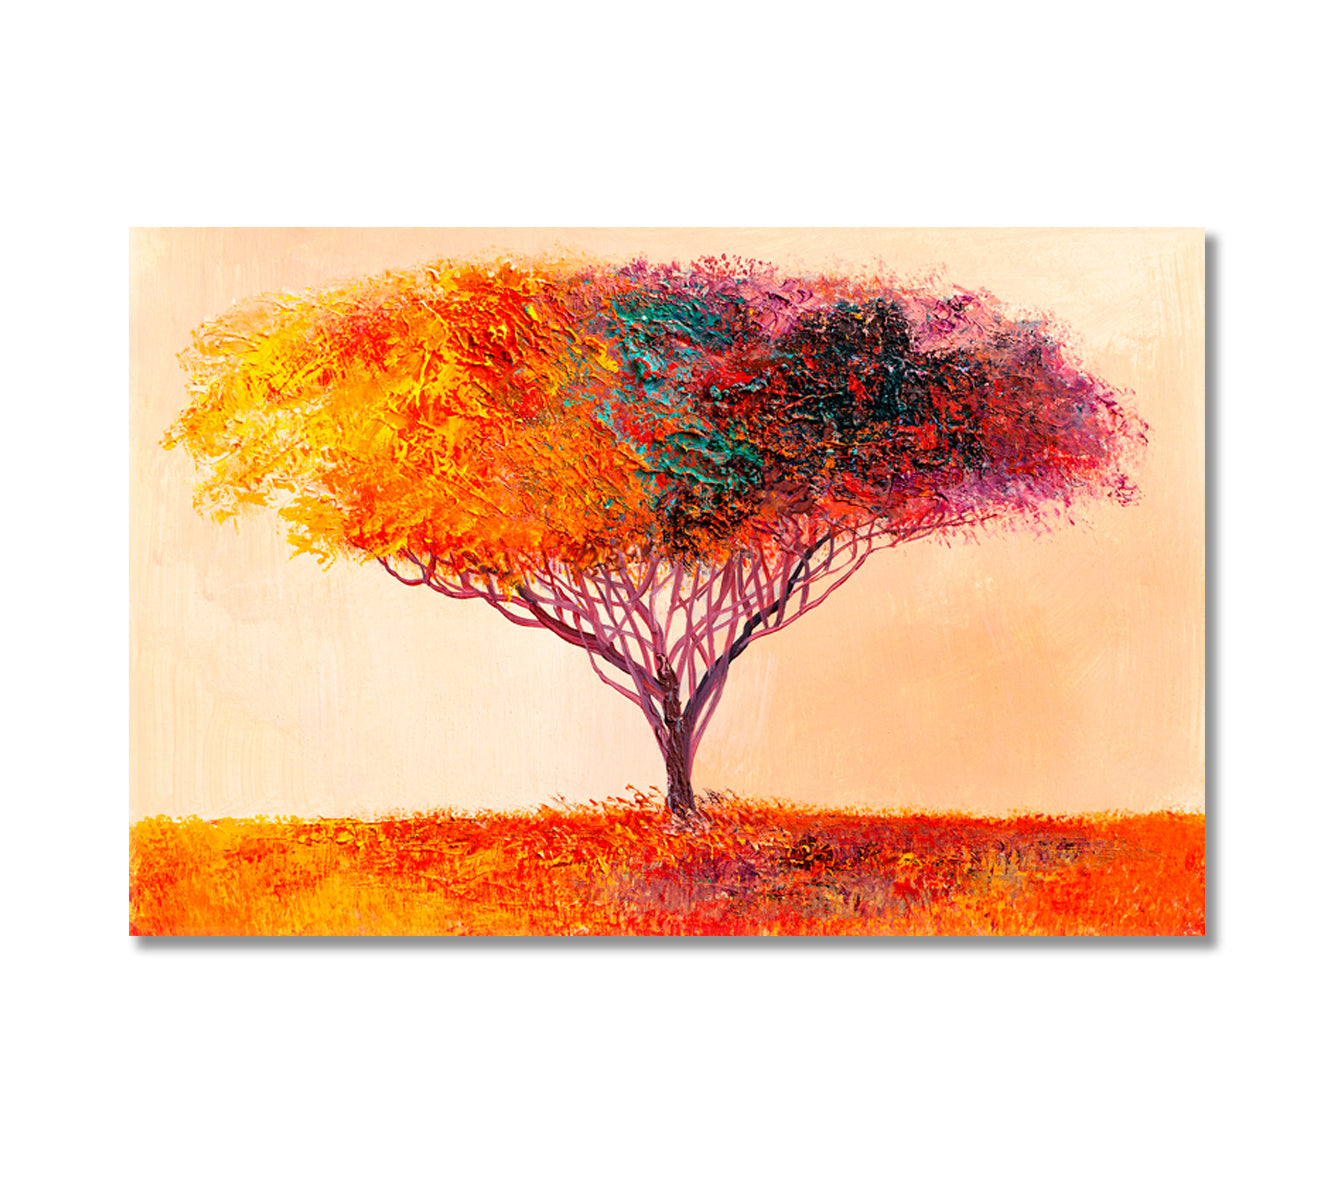 Abstract Colorful Tree Canvas Print-Canvas Print-CetArt-1 Panel-24x16 inches-CetArt